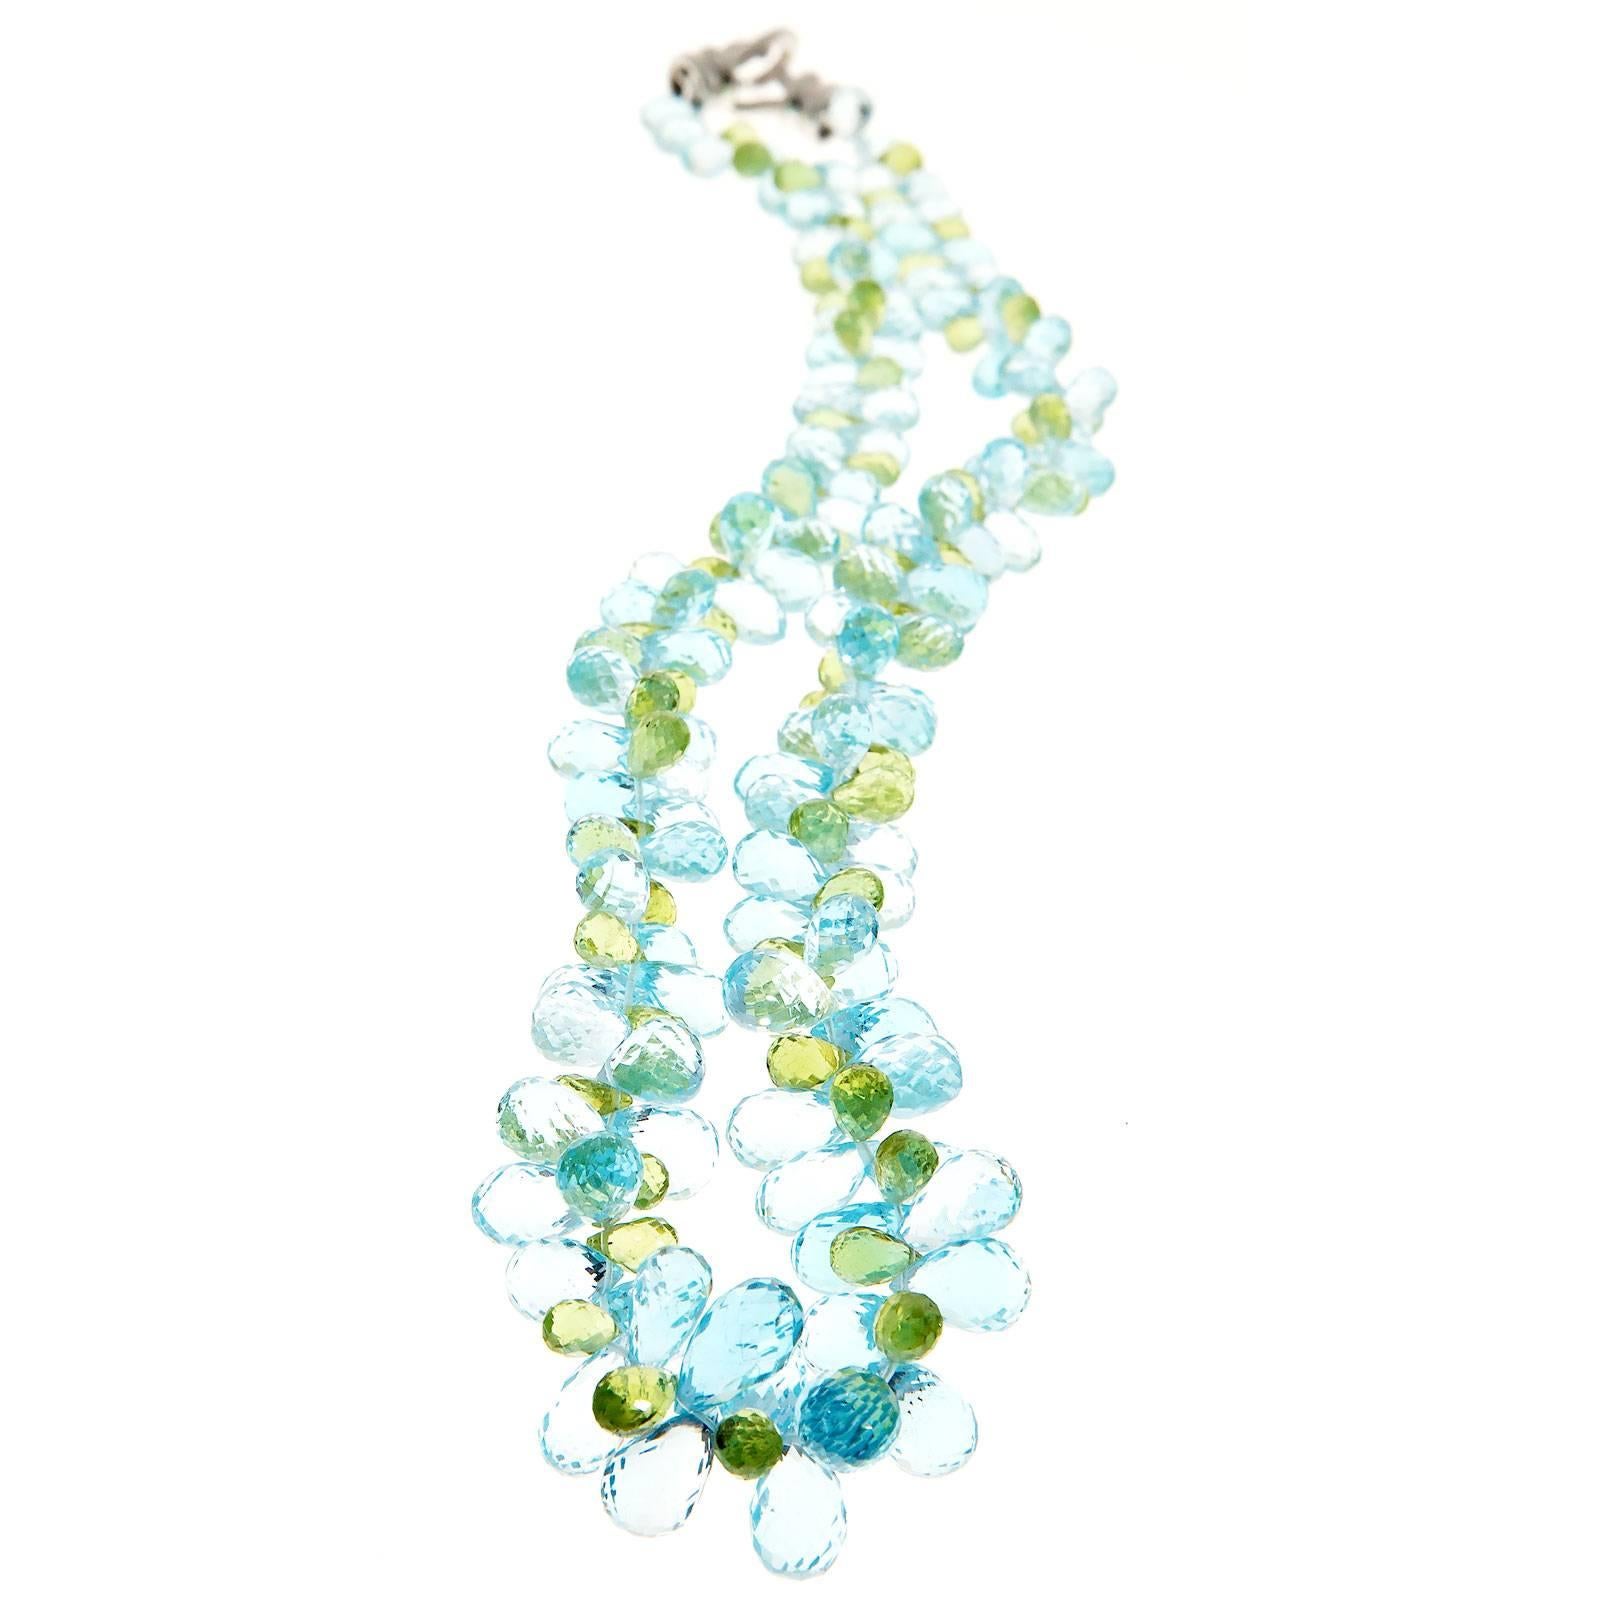 Genuine natural stone graduated briolette necklace. Bright blue Topaz and Peridot.

Approx. 180 Briolette cut bright blue Topaz 342.00cts 7 x 4.5mm to 11 x 7mm    
69.2 grams    
Total width: 11 x 20mm or .46 x .80 inch
Length: 18 inches   